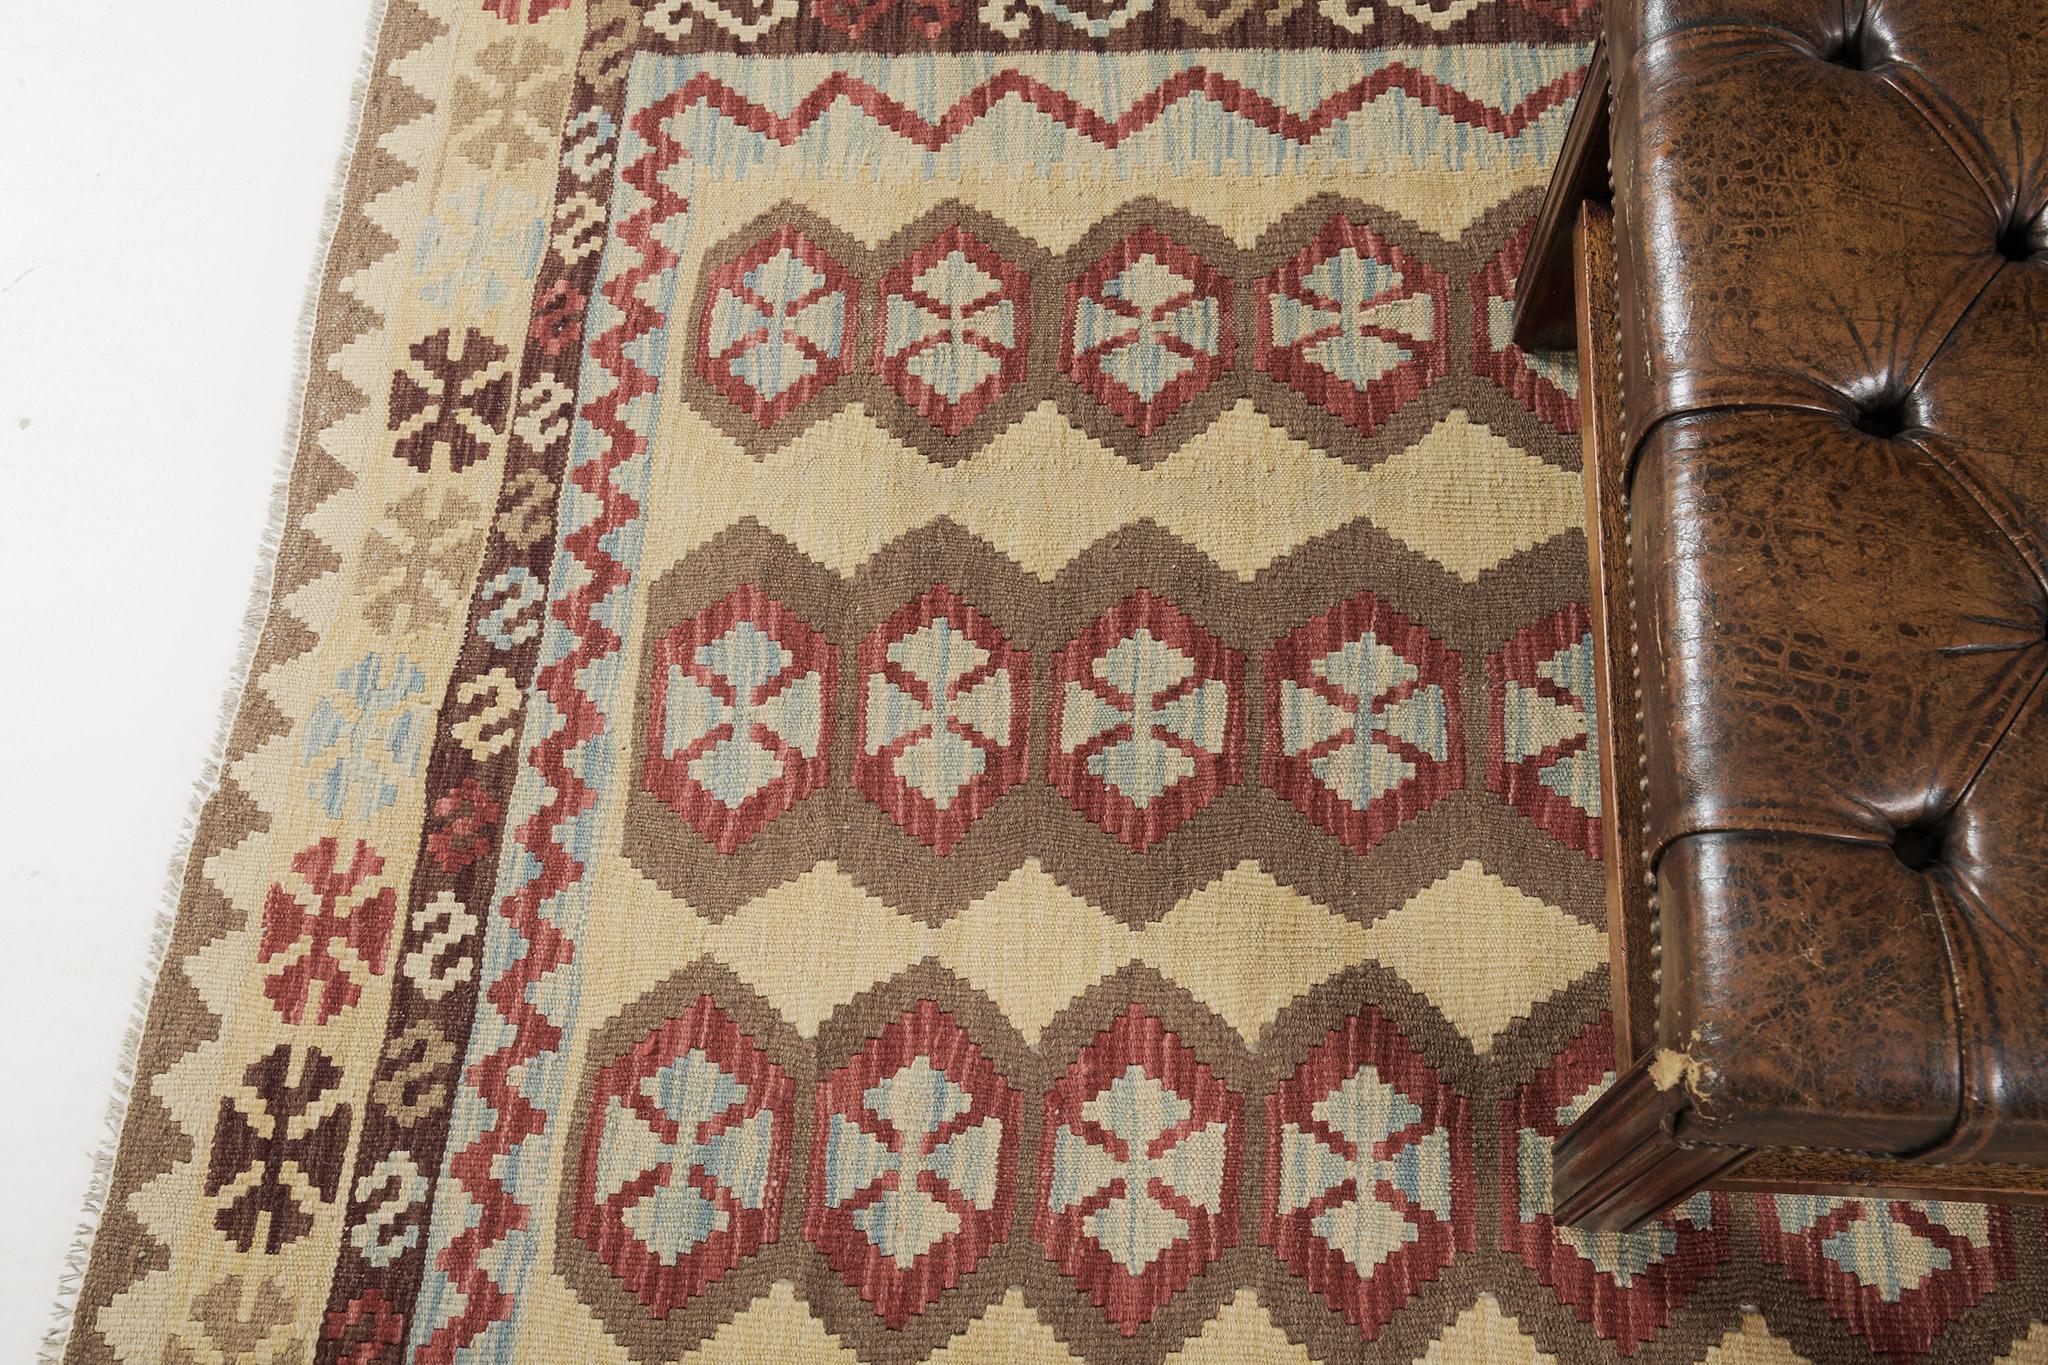 The motifs are in hexagon patterns that create a joyous and impressive design for a vast variety of interiors in a yellow field. A stunningly beautiful vintage-styled flatweave Kilim is banded with zigzag patterns and geometric motifs in alternates